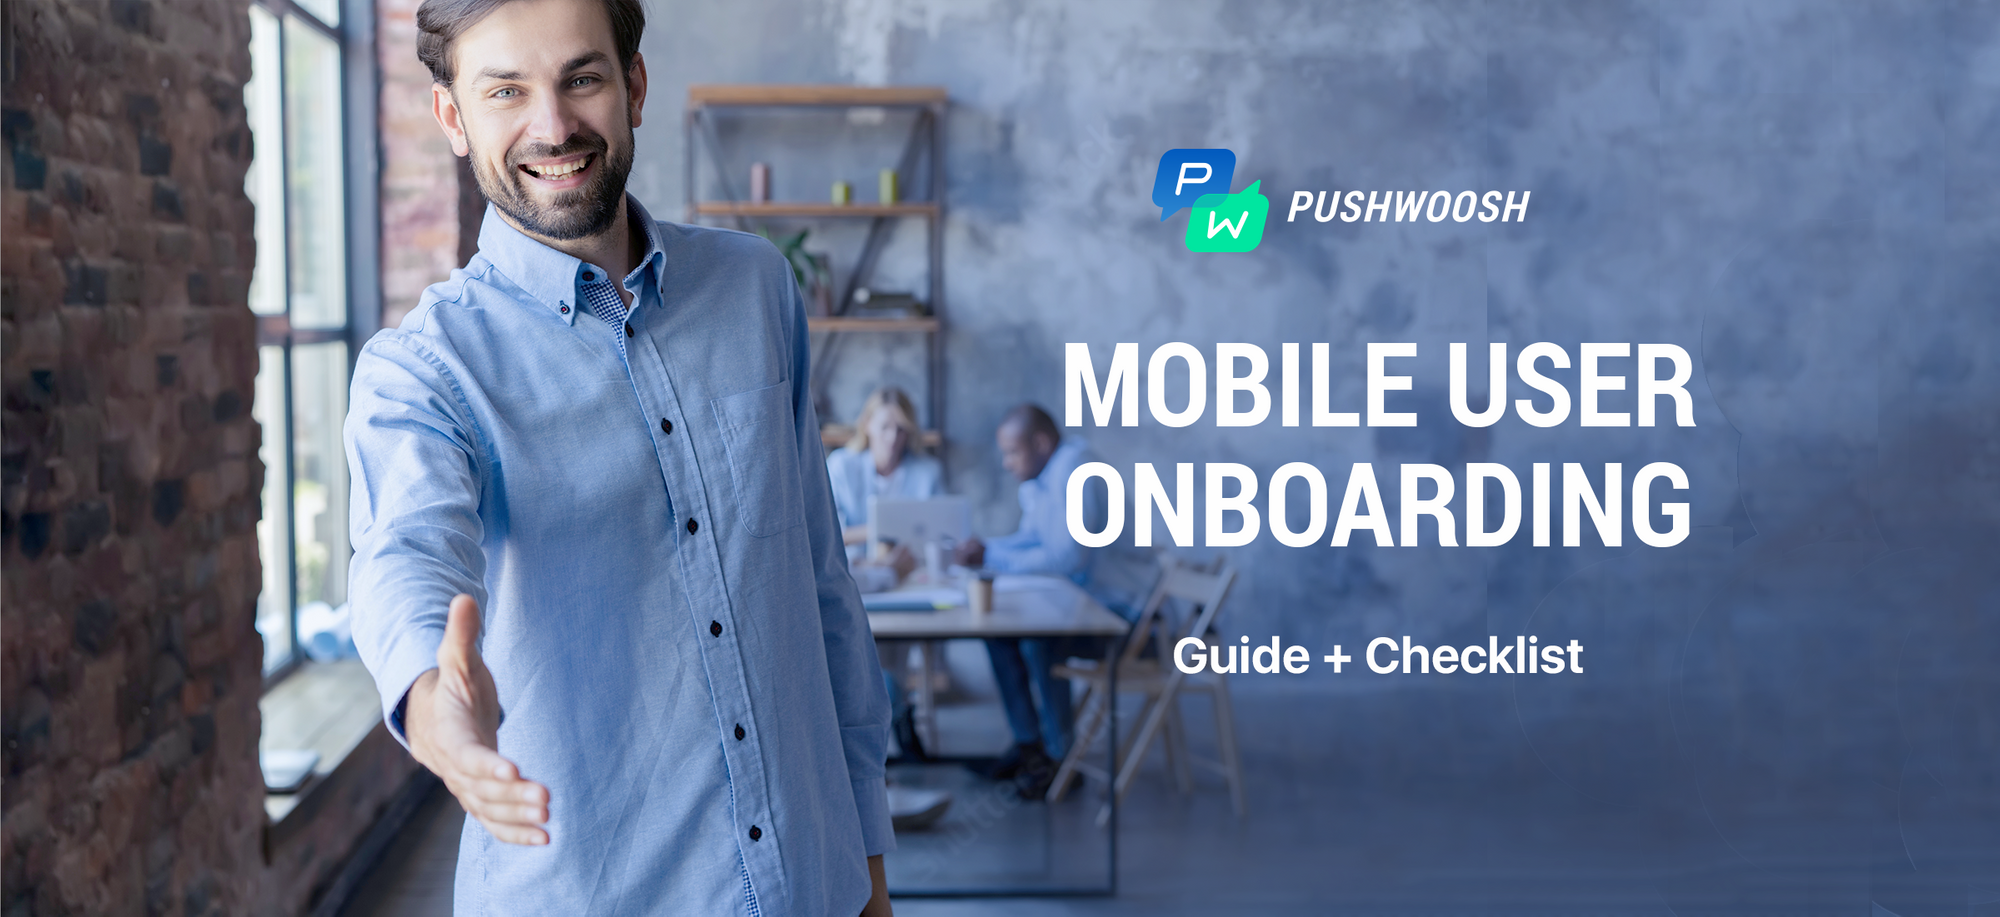 How to Set Up Mobile User Onboarding: Guide + Checklist